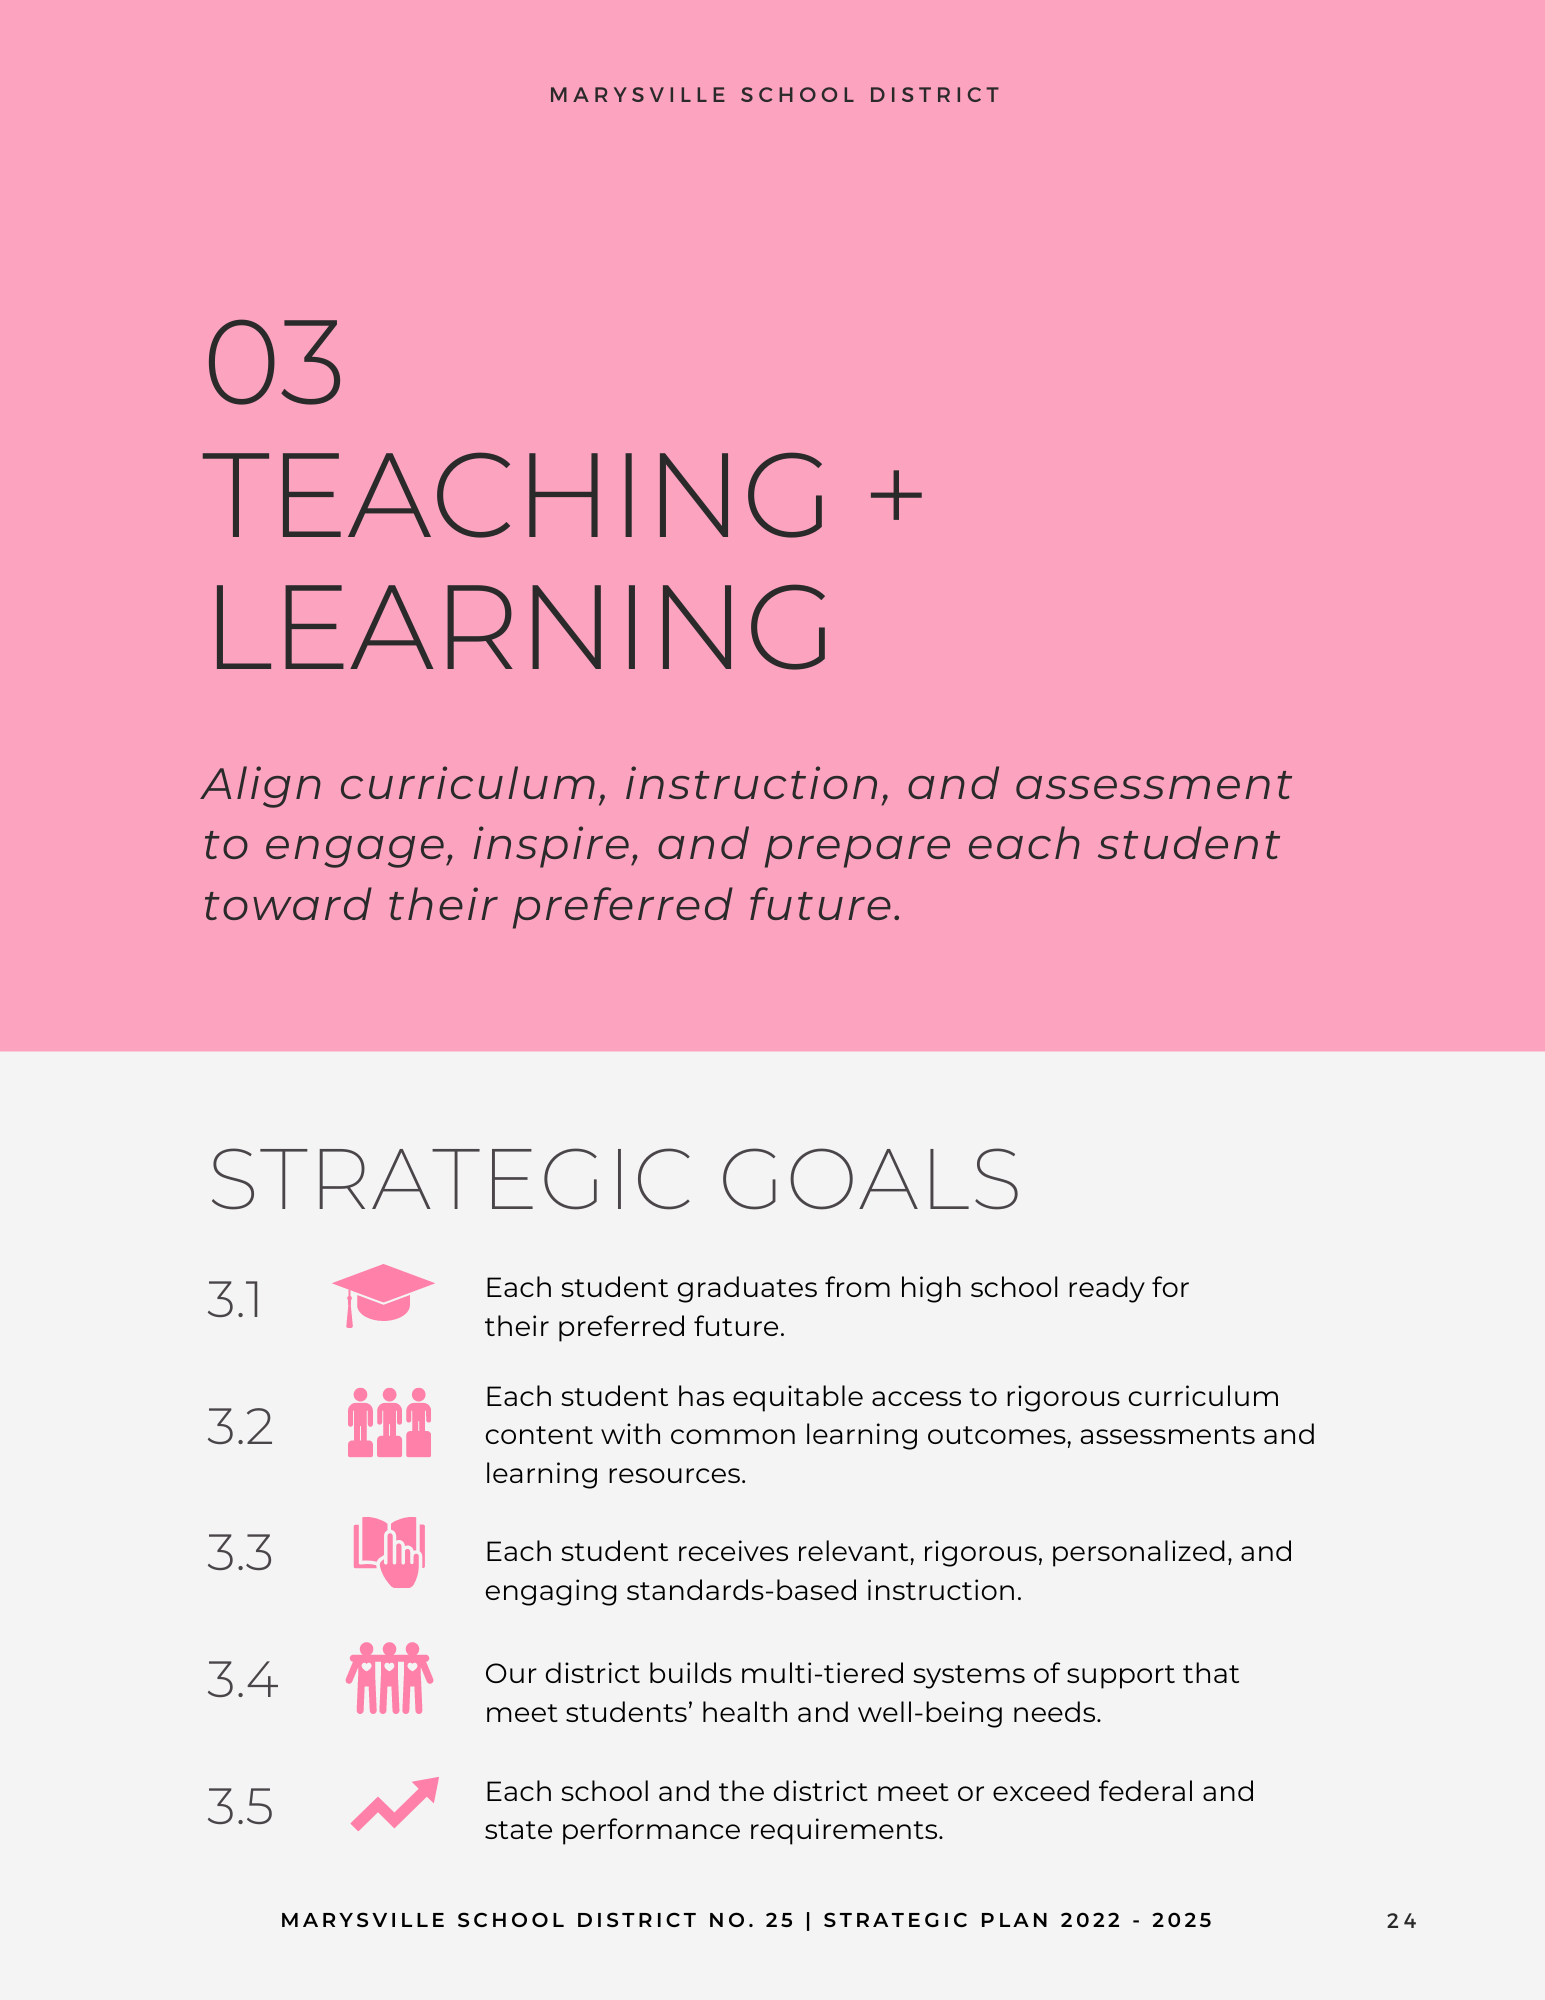 03 Teaching and Learning